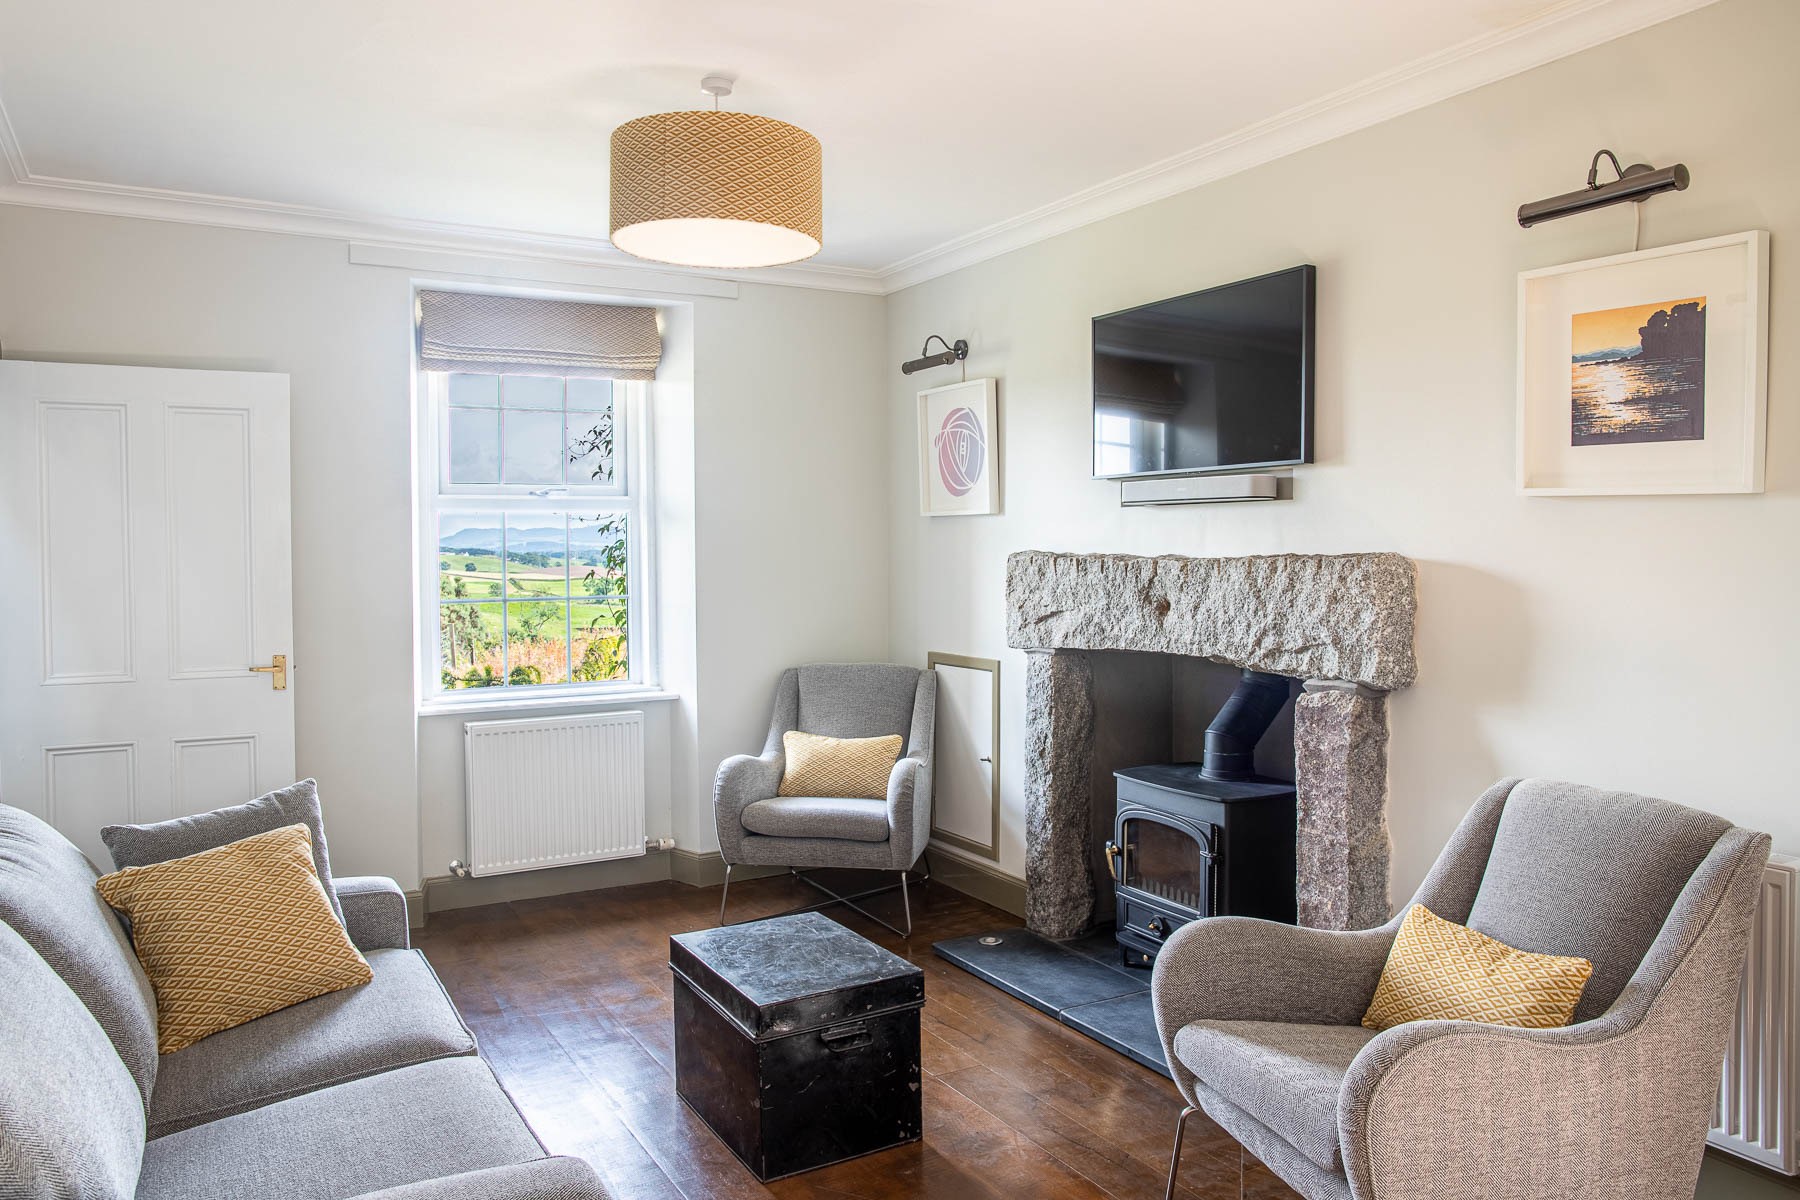 Culdoach Cottage - open plan living space with log burner, TV, and comfortable seating